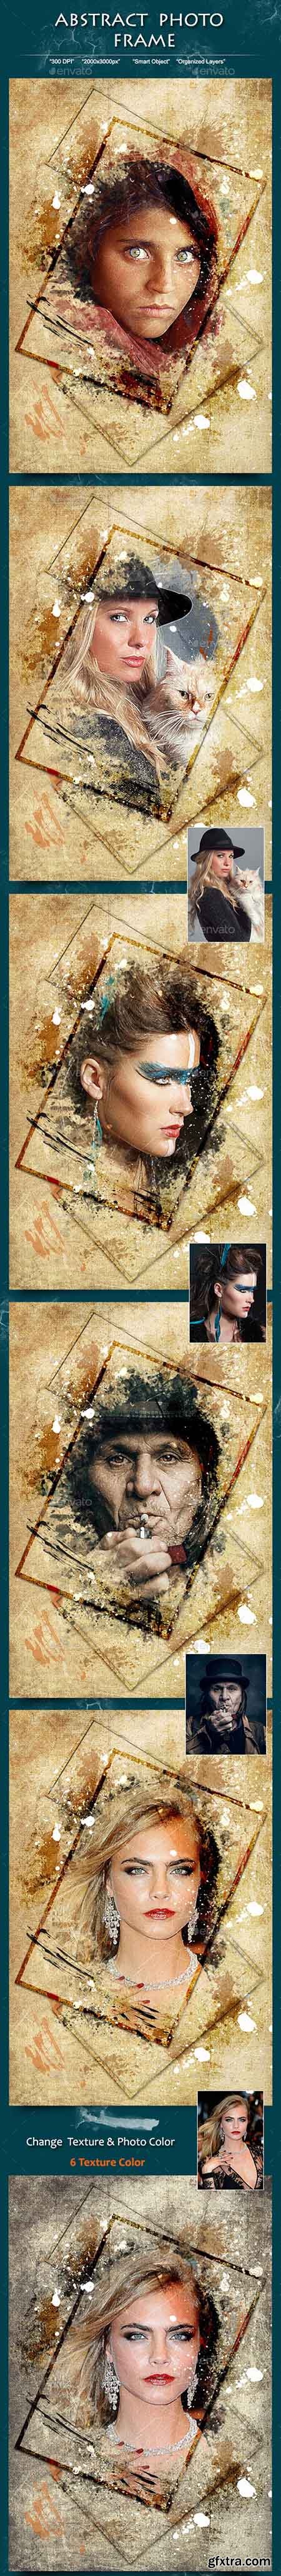 GraphicRiver - Abstract Photo Frame 19354213